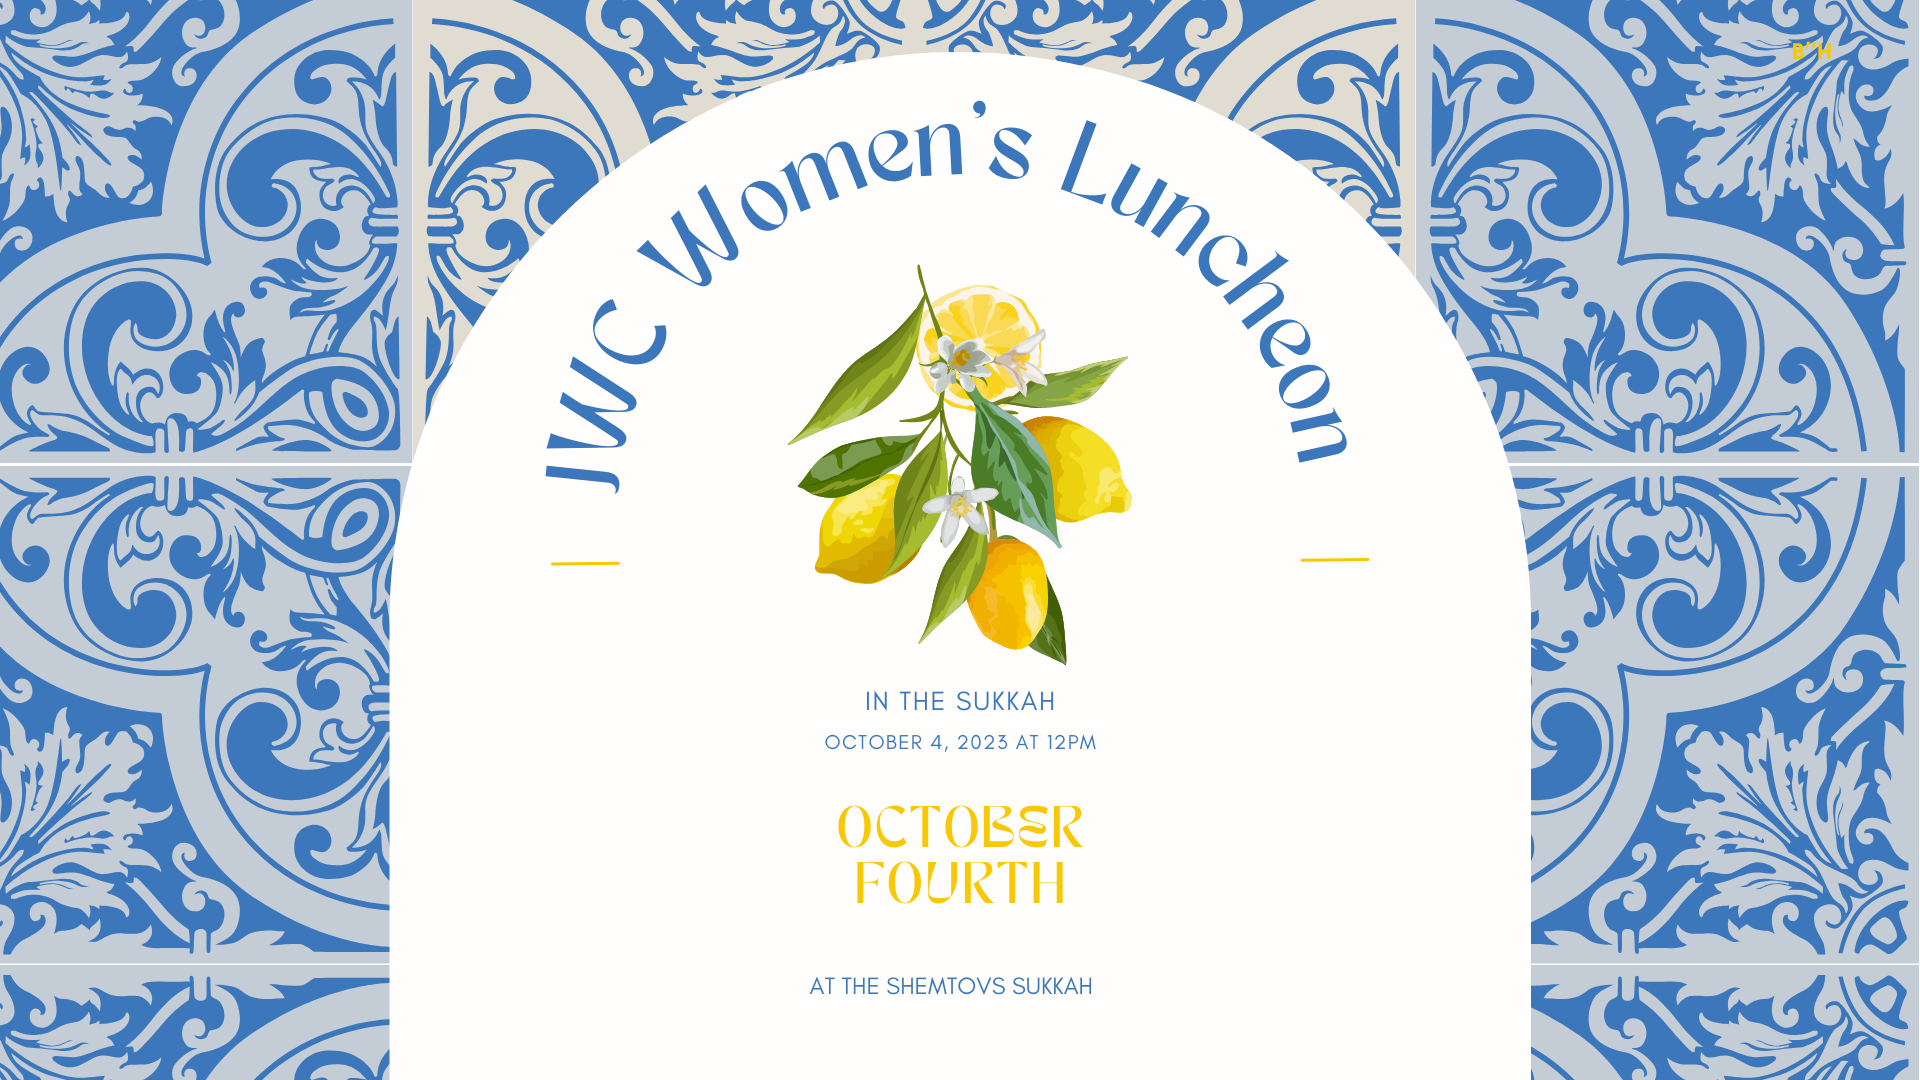 Copy%20of%20jwc%20womens%20luncheon%20_4_.png